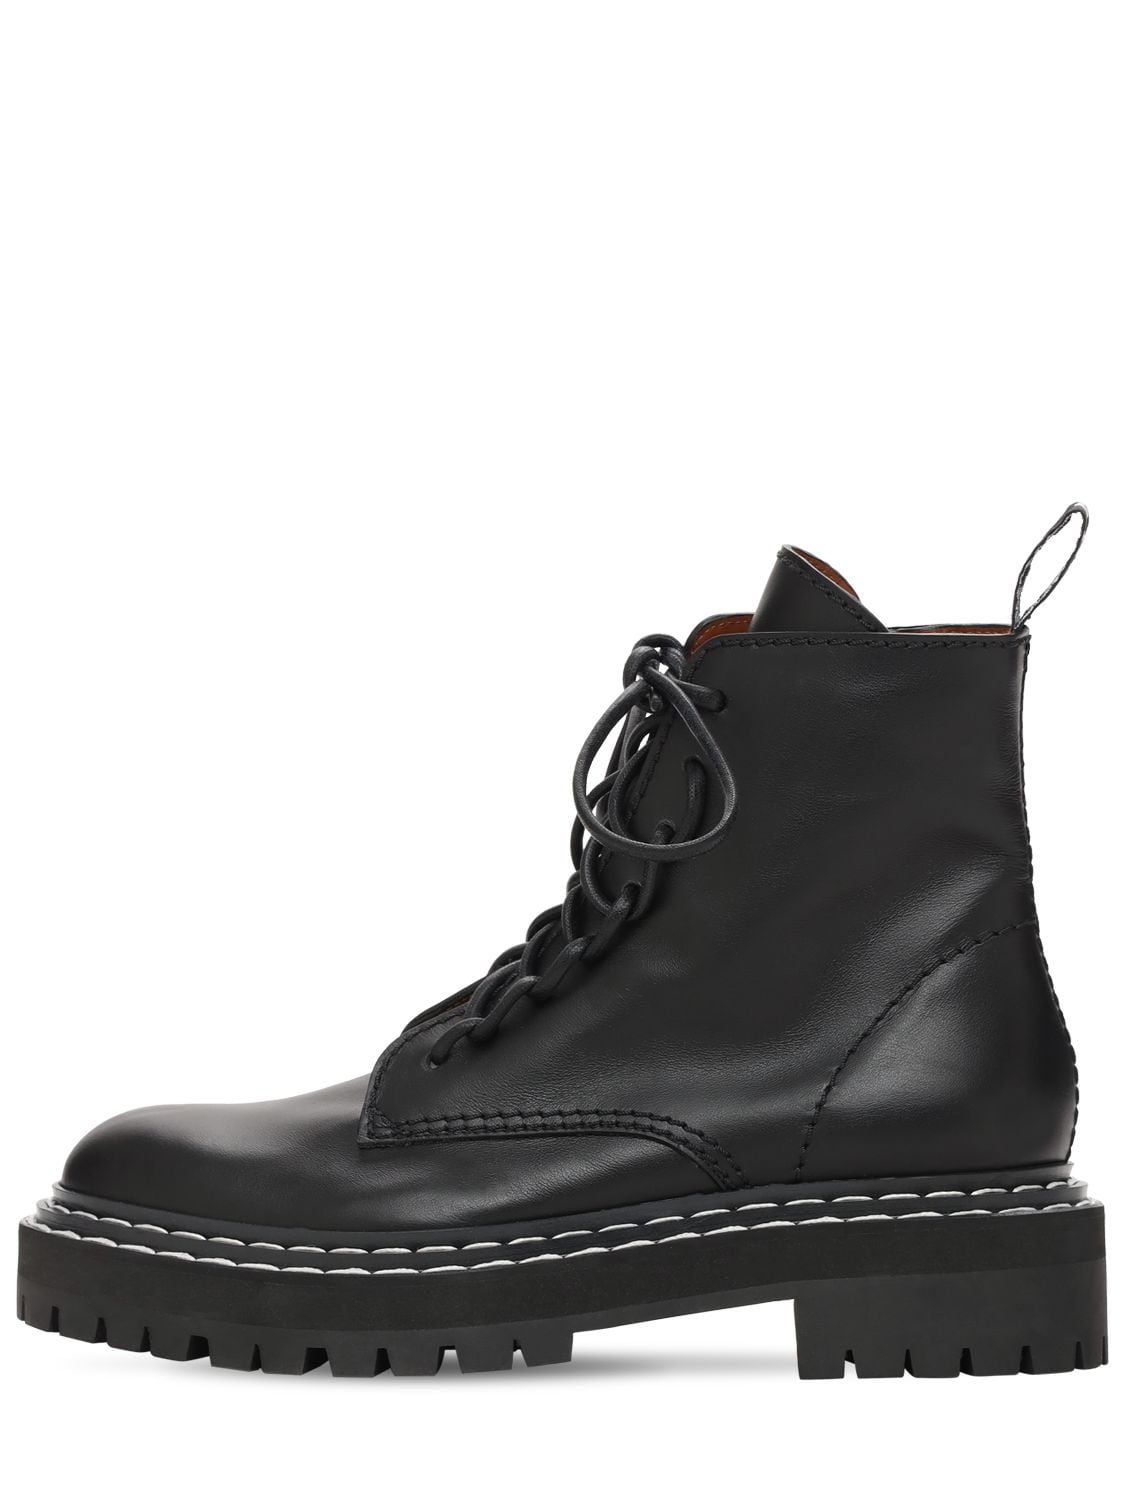 Proenza Schouler 30mm Lug Sole Leather Combat Boots In Black | ModeSens